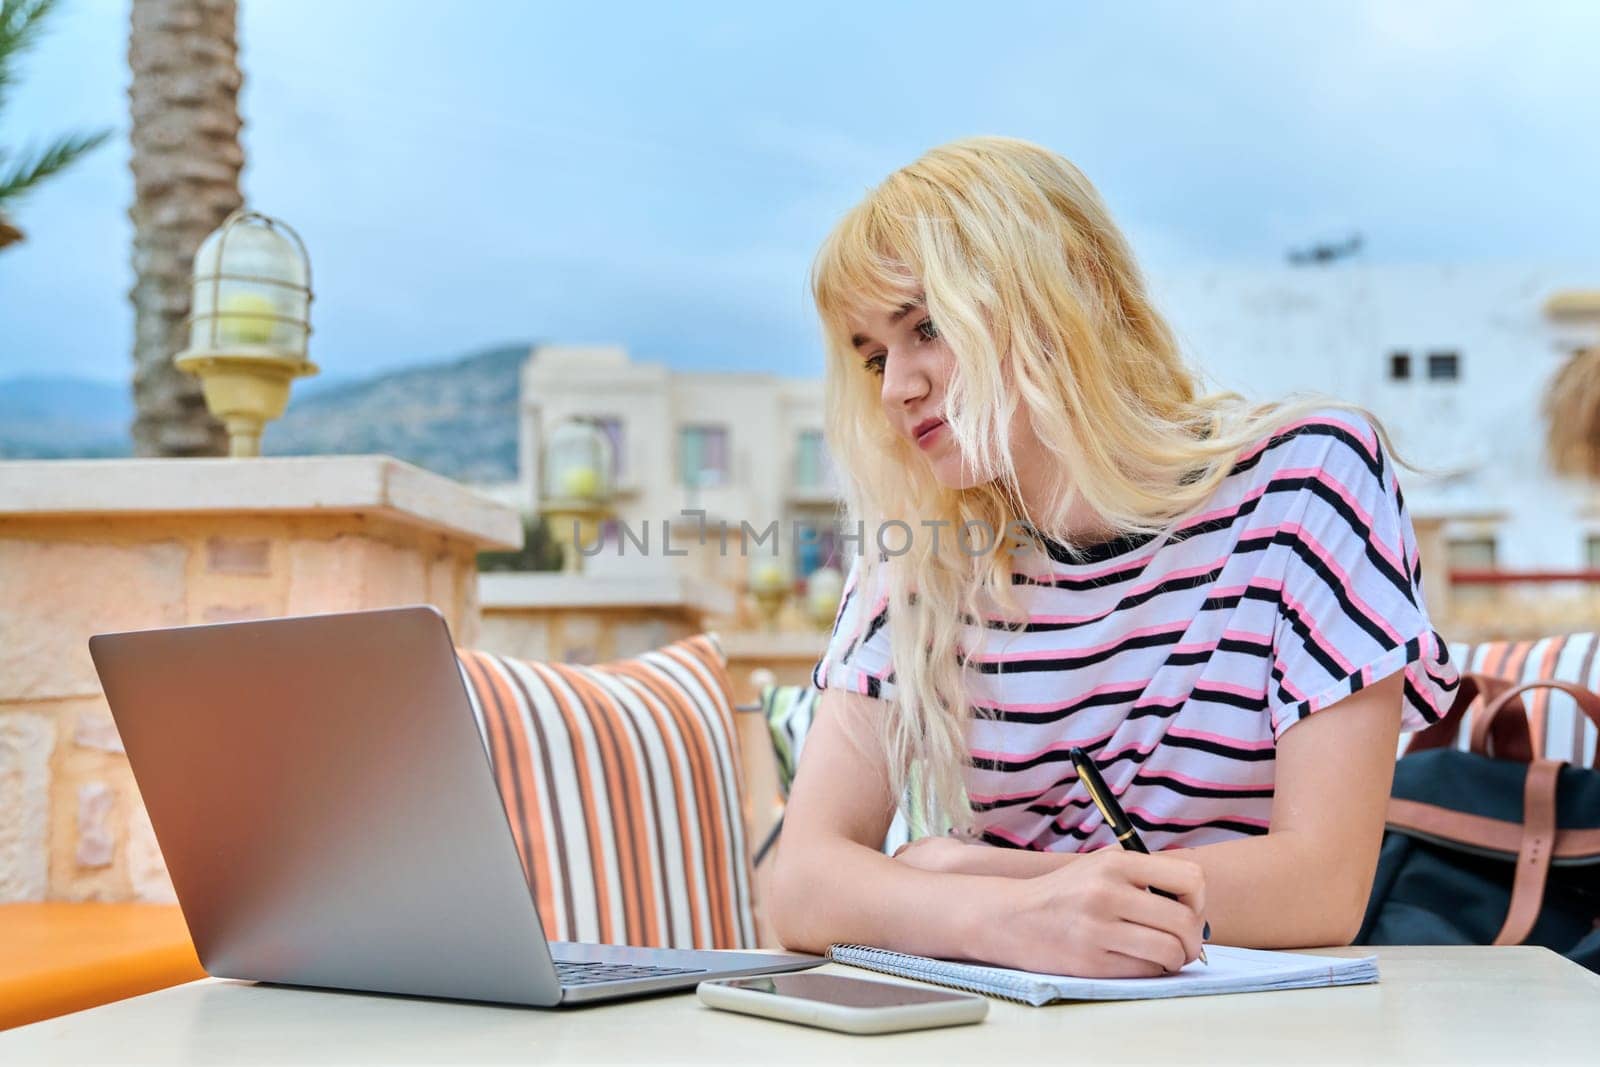 Teenage student sitting at an outdoor table, using a laptop, writing in a notebook by VH-studio